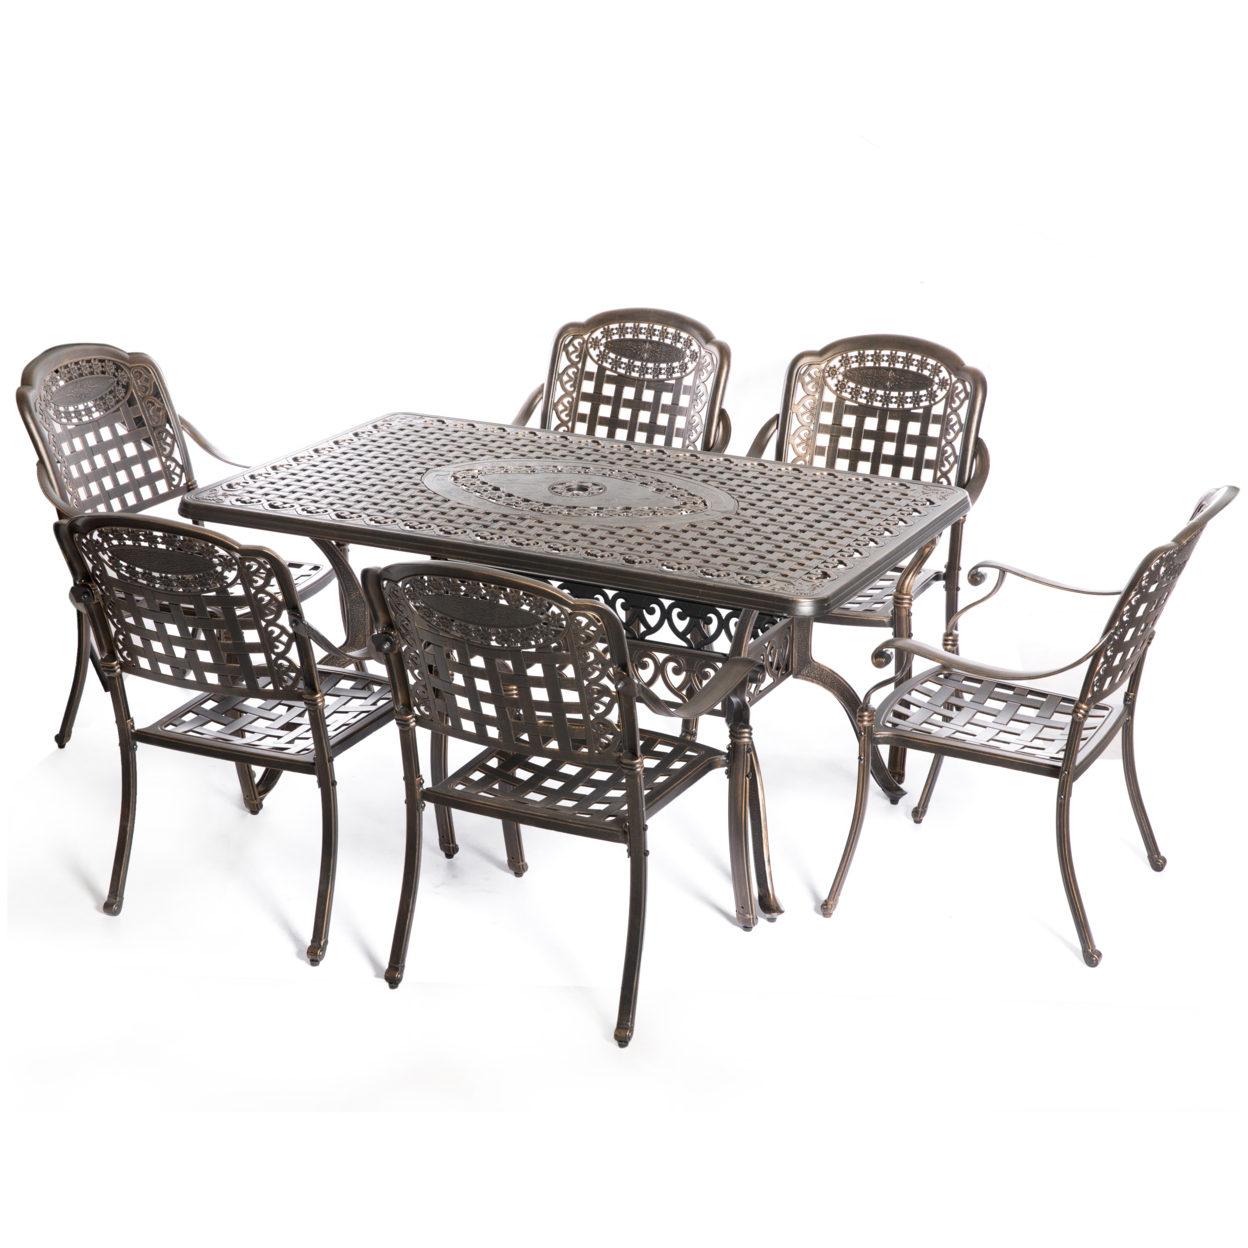 Indoor And Outdoor Bronze Dinning Set 6 Chairs With 1 Table Bistro Patio Cast Aluminum.